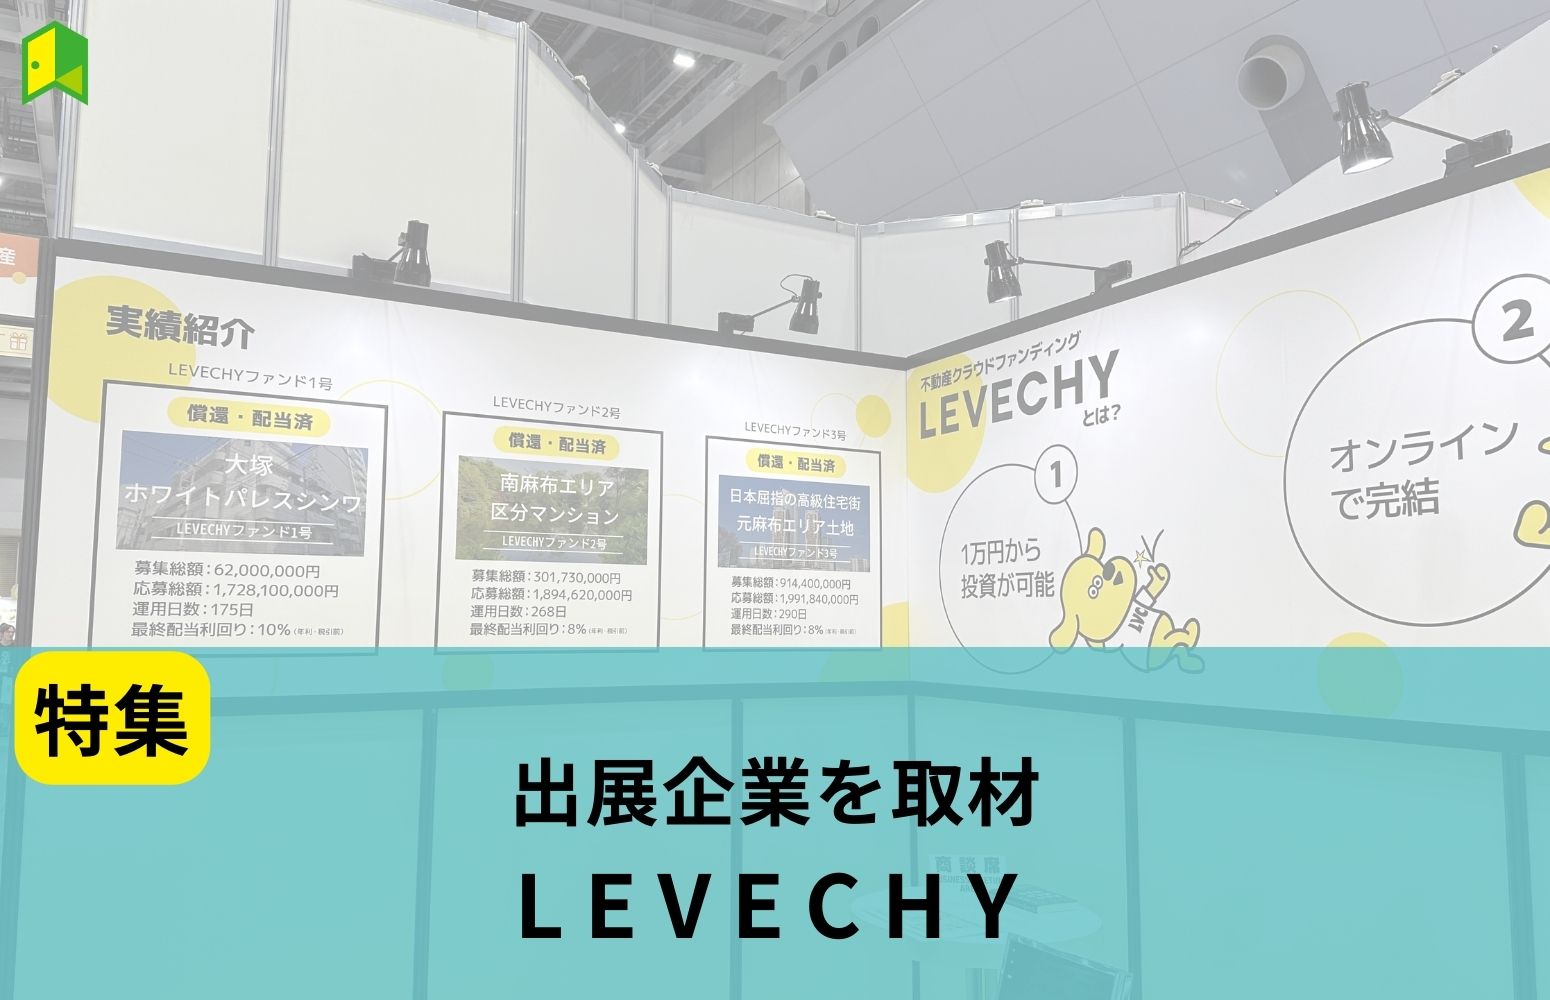 LEVECHY
